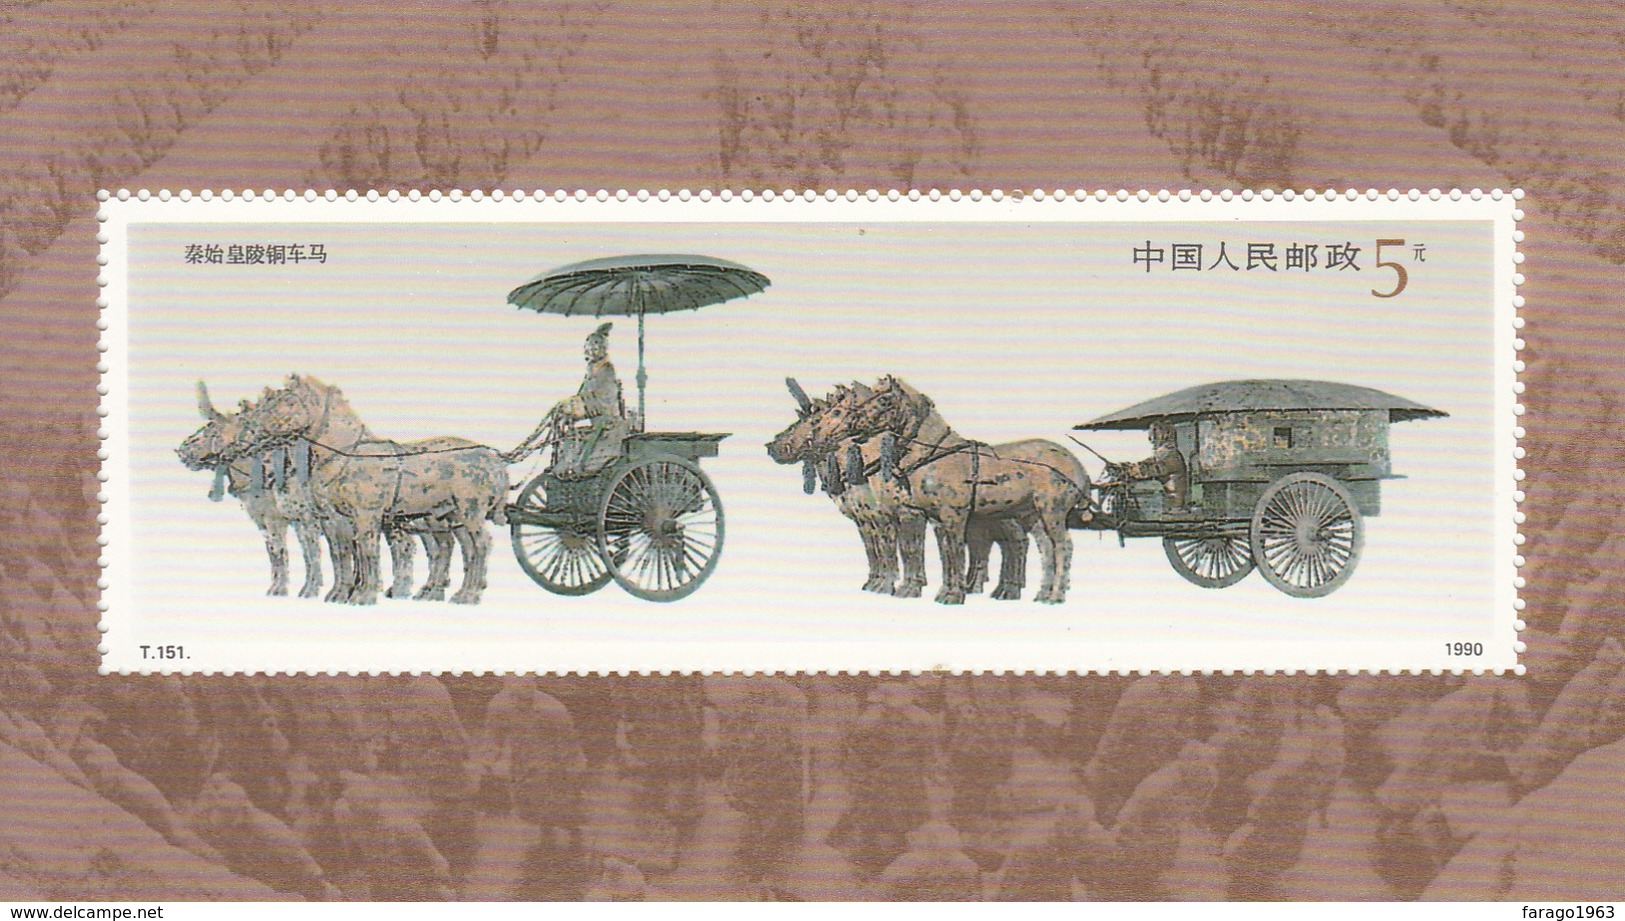 1990 China Bronze Treasures Chariots Horses  From Huang Mausoleum  Souvenir Sheet  MNH - Unused Stamps